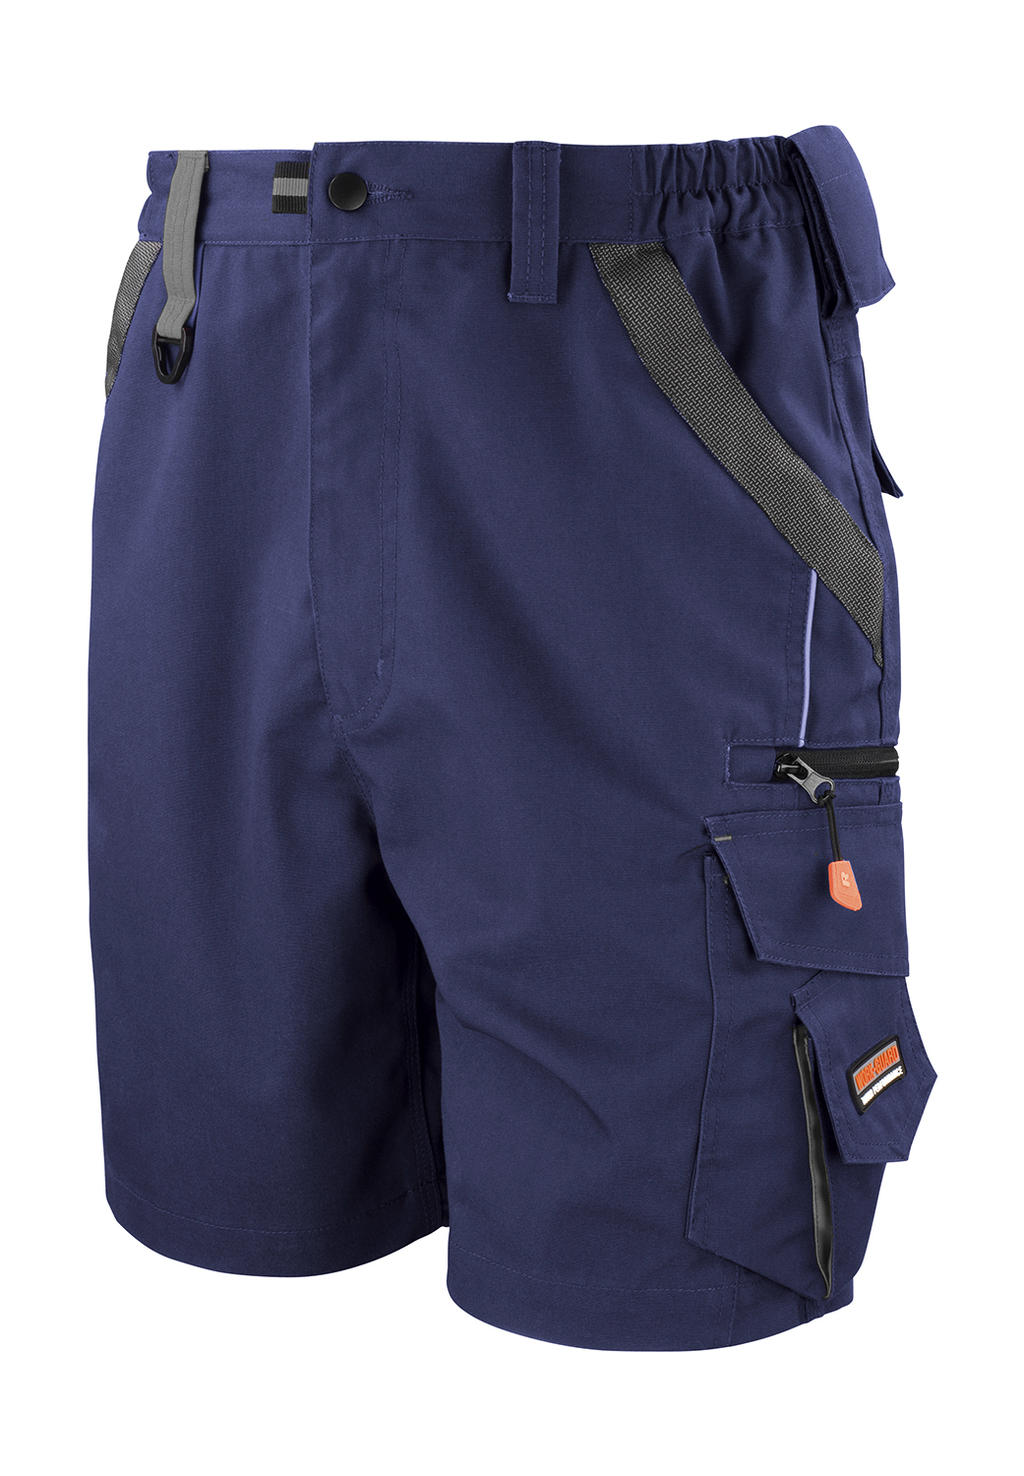  Work-Guard Technical Shorts in Farbe Navy/Black